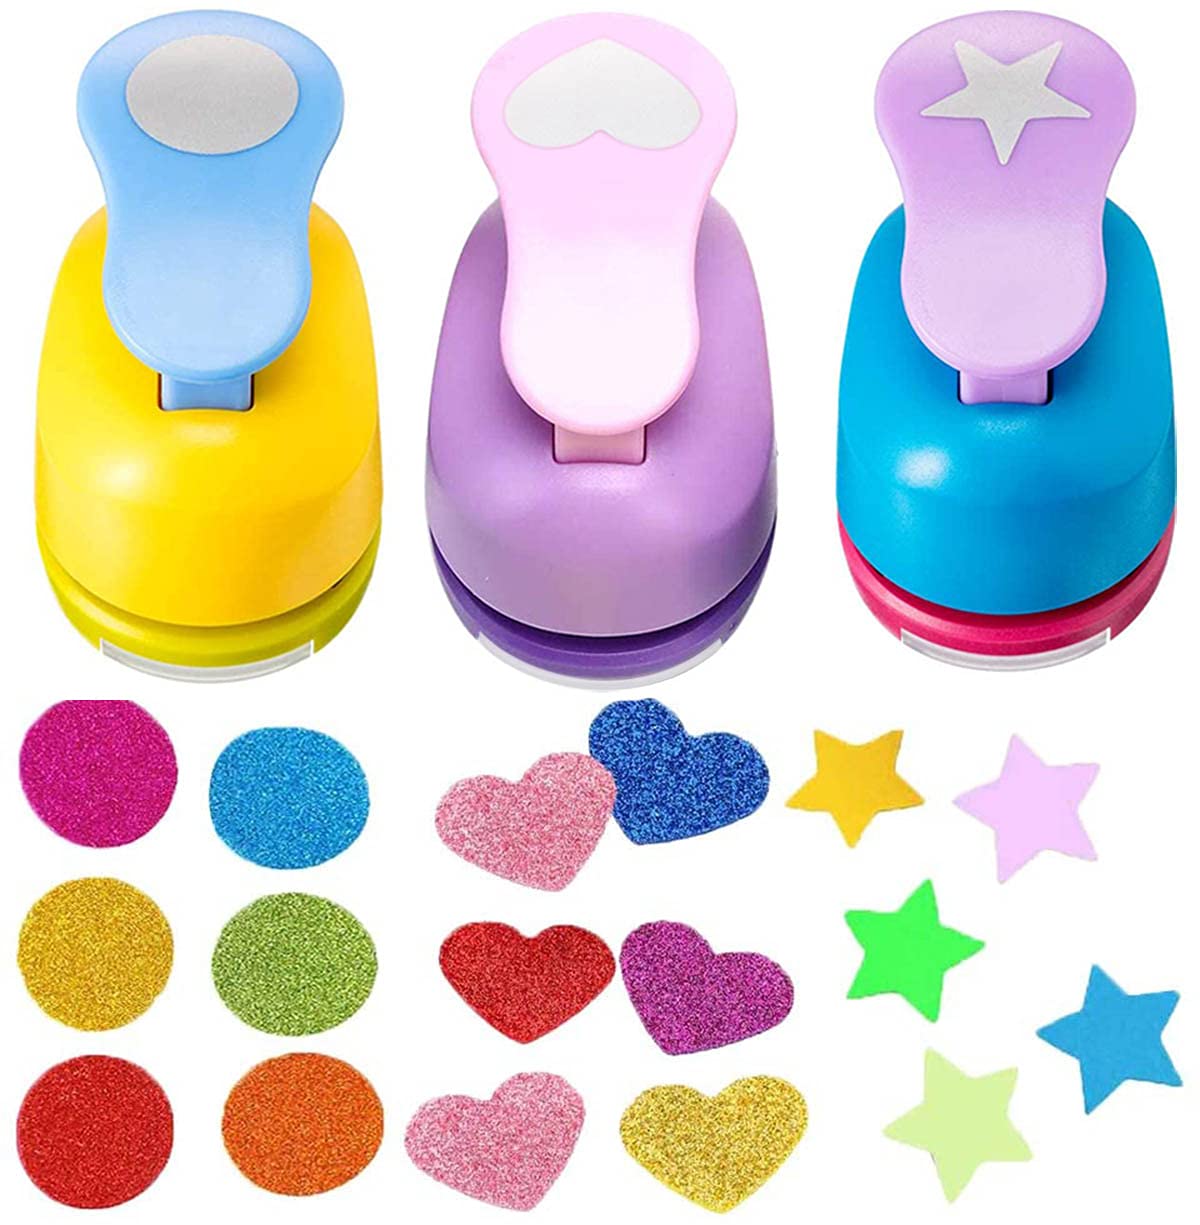 3Pcs 1 Inch Paper Punches with Heart,Star,Circle Craft Hole Shapes